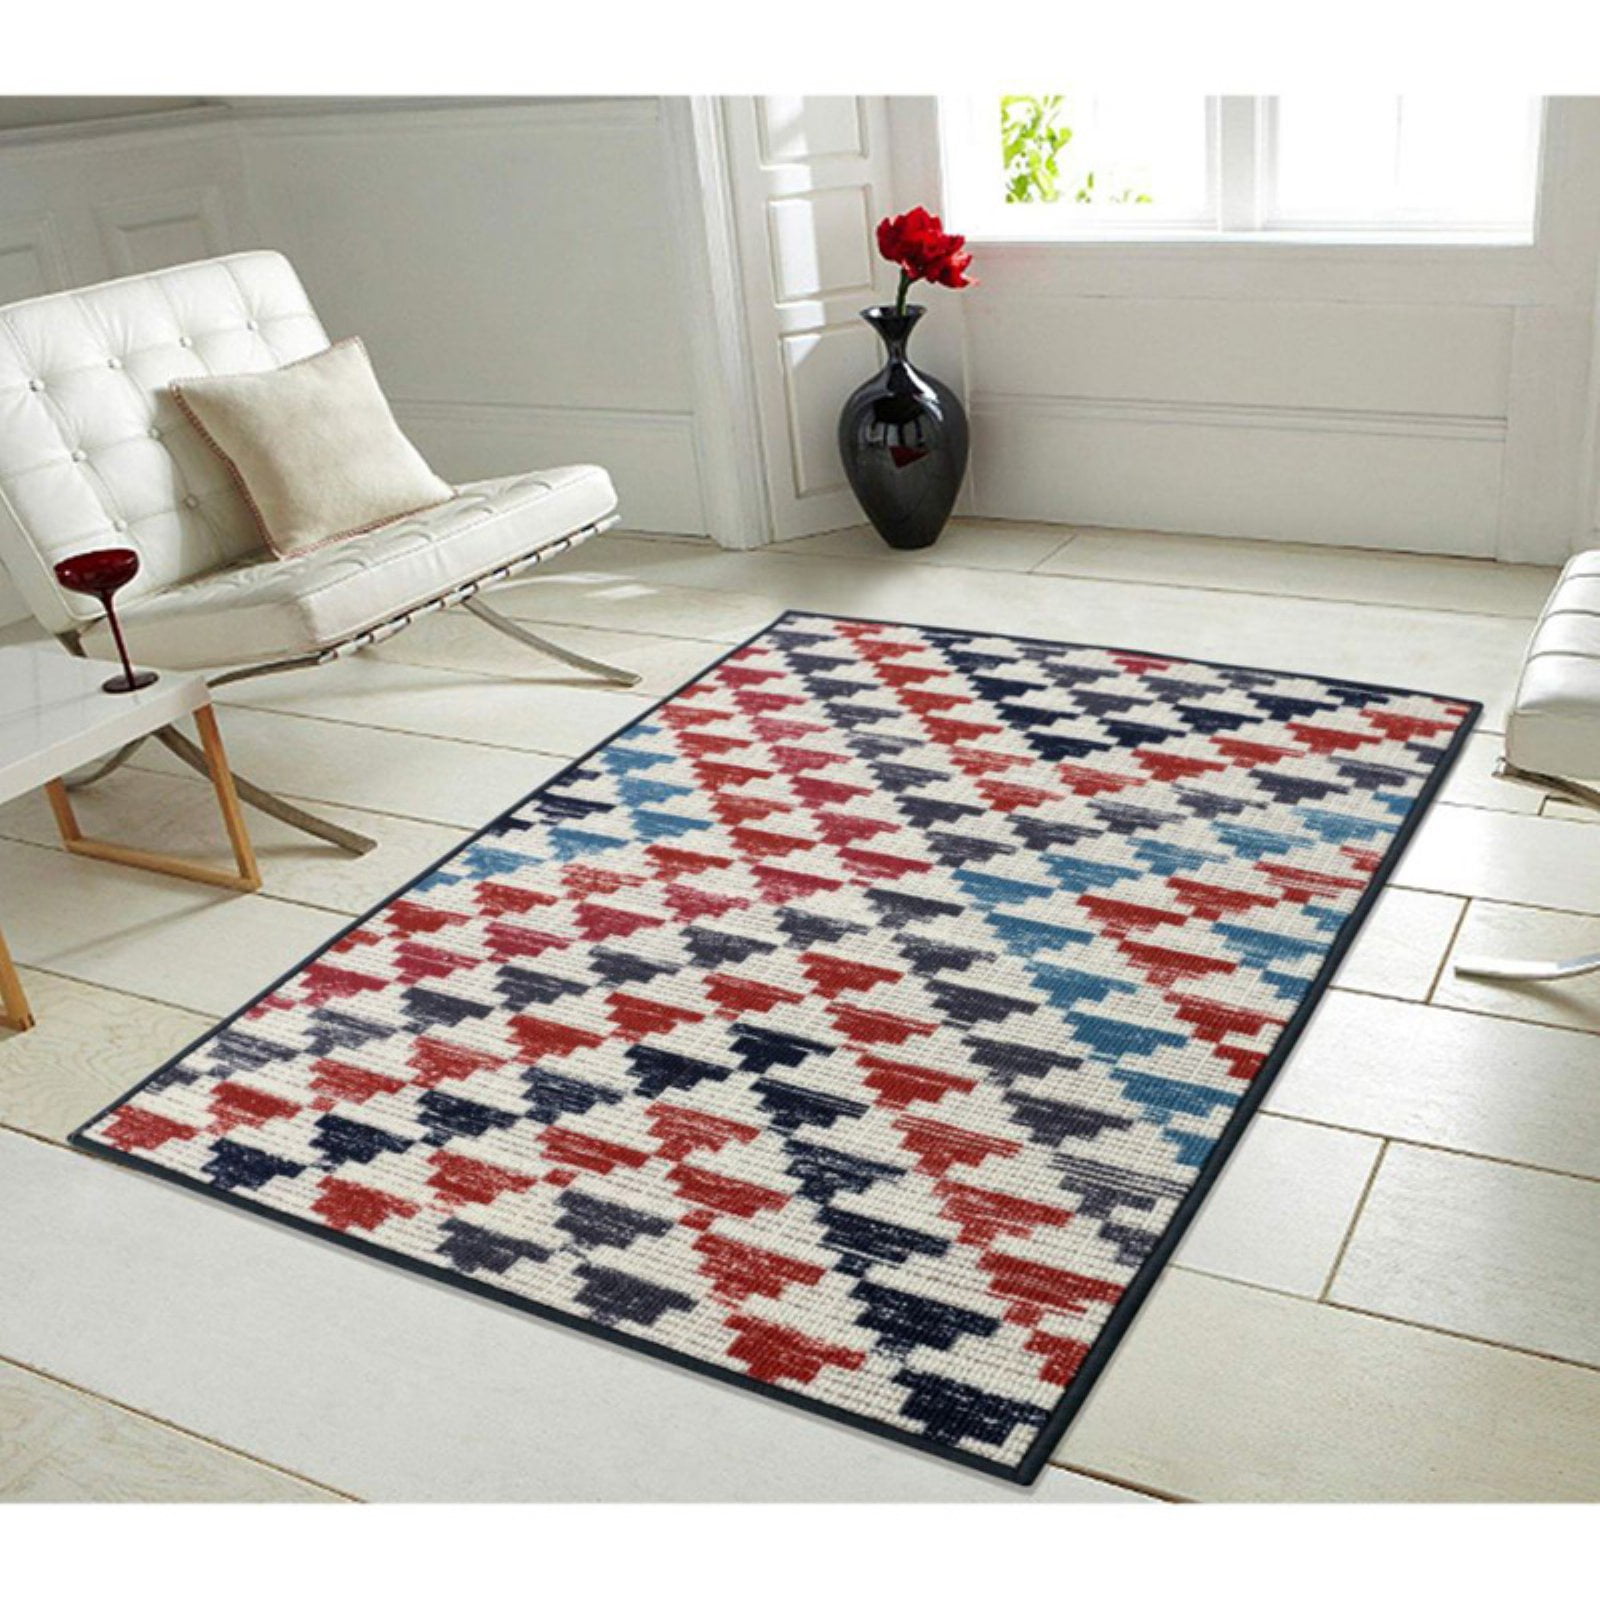 Rugsmith Seville Area Rug 5' x 7' Rust